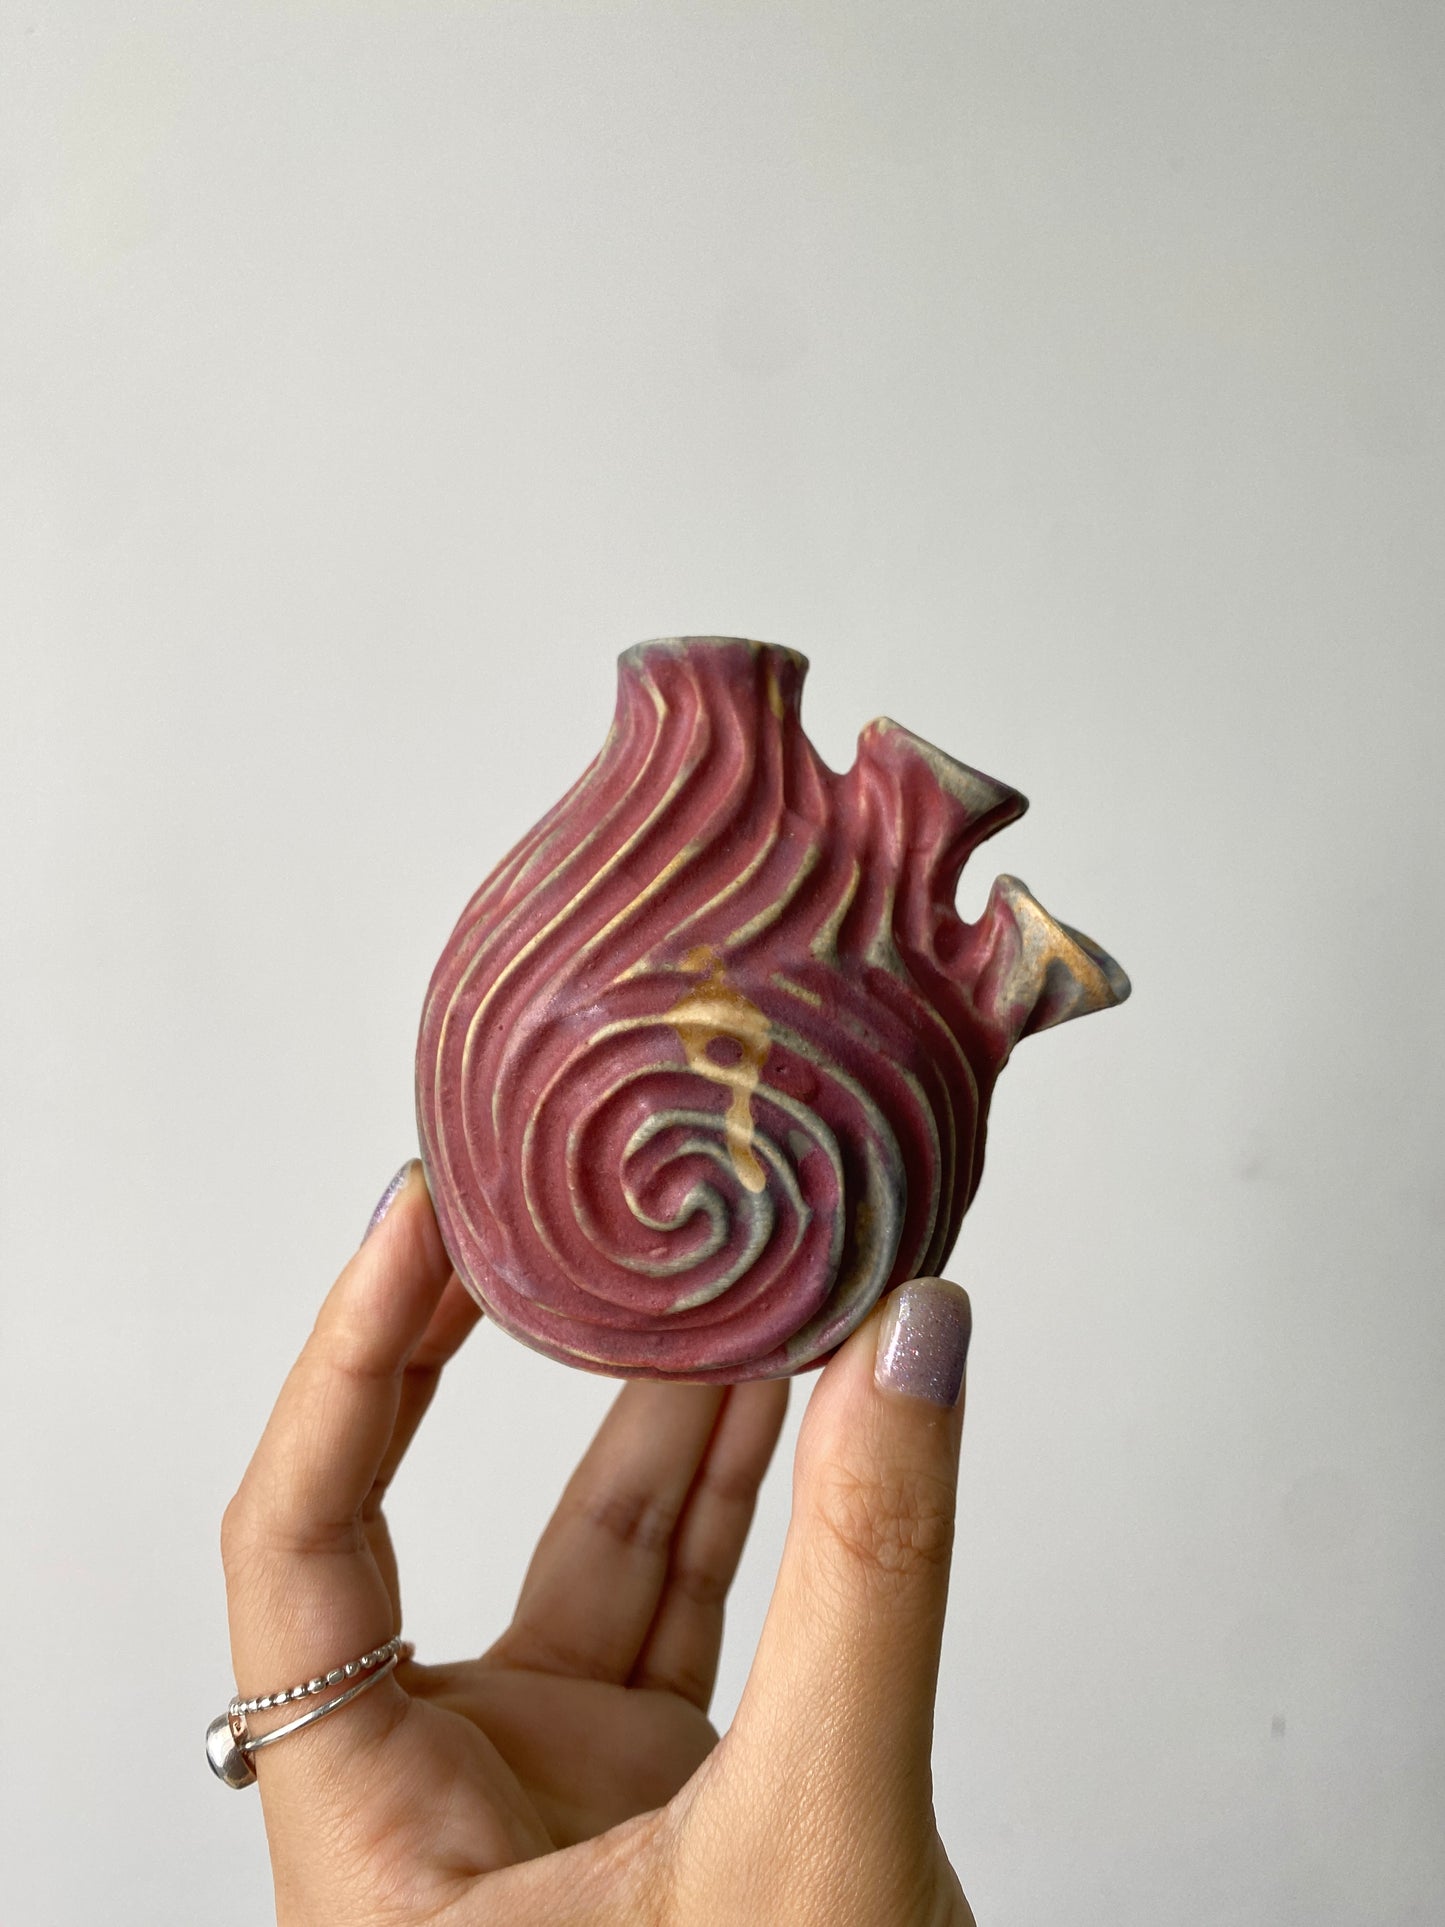 Mini Seaheart Budvase in Clam Pink.